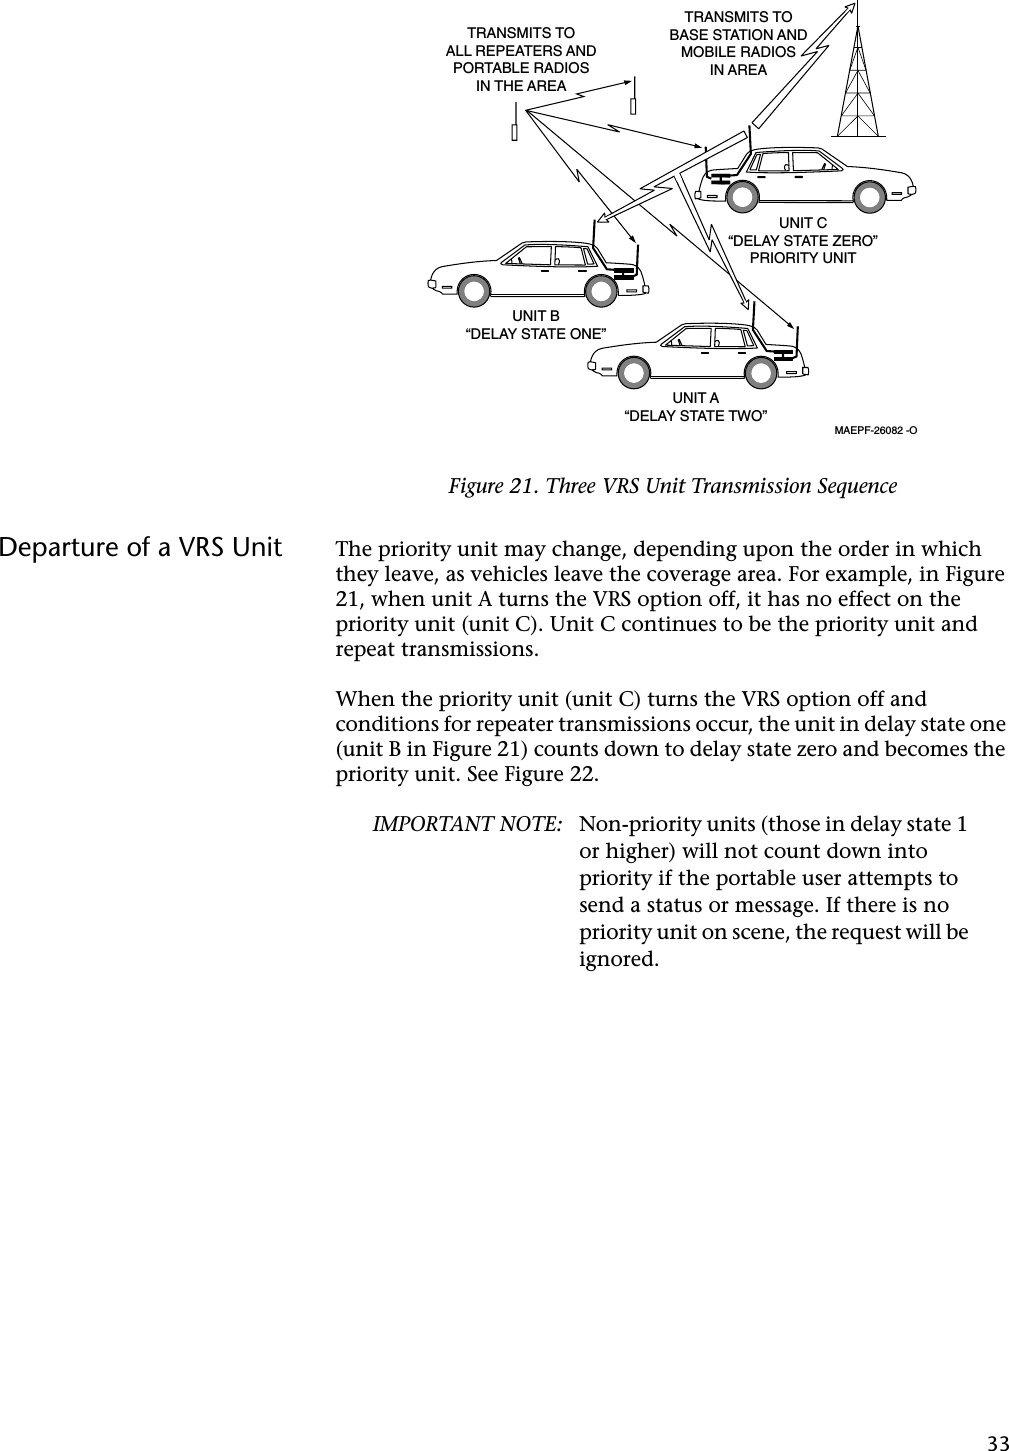 33Departure of a VRS Unit The priority unit may change, depending upon the order in which they leave, as vehicles leave the coverage area. For example, in Figure 21, when unit A turns the VRS option off, it has no effect on the priority unit (unit C). Unit C continues to be the priority unit and repeat transmissions.When the priority unit (unit C) turns the VRS option off and conditions for repeater transmissions occur, the unit in delay state one (unit B in Figure 21) counts down to delay state zero and becomes the priority unit. See Figure 22.IMPORTANT NOTE: Non-priority units (those in delay state 1 or higher) will not count down into priority if the portable user attempts to send a status or message. If there is no priority unit on scene, the request will be ignored.Figure 21. Three VRS Unit Transmission SequenceUNIT B“DELAY STATE ONE”UNIT A“DELAY STATE TWO”UNIT C“DELAY STATE ZERO”PRIORITY UNITMAEPF-26082 -OTRANSMITS TOBASE STATION ANDMOBILE RADIOSIN AREATRANSMITS TOALL REPEATERS ANDPORTABLE RADIOSIN THE AREA